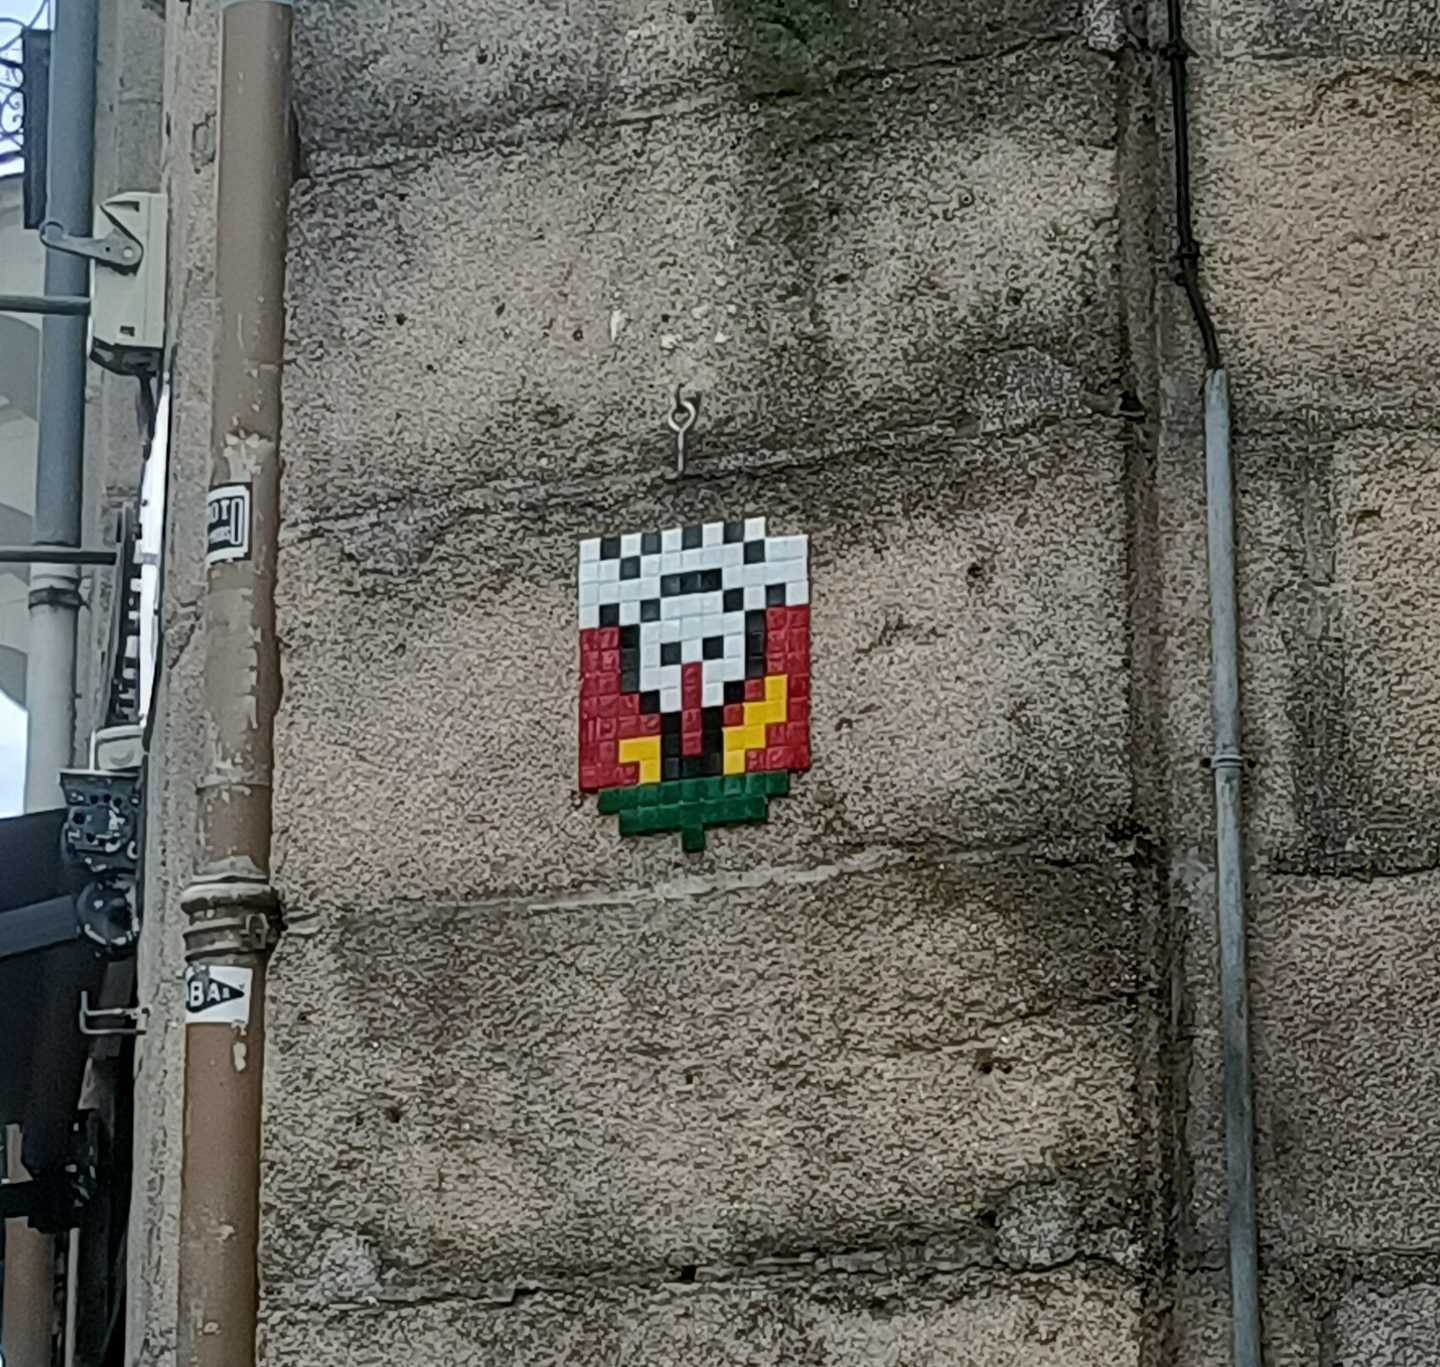 Mosaic 5772  captured by Rabot in Nantes France